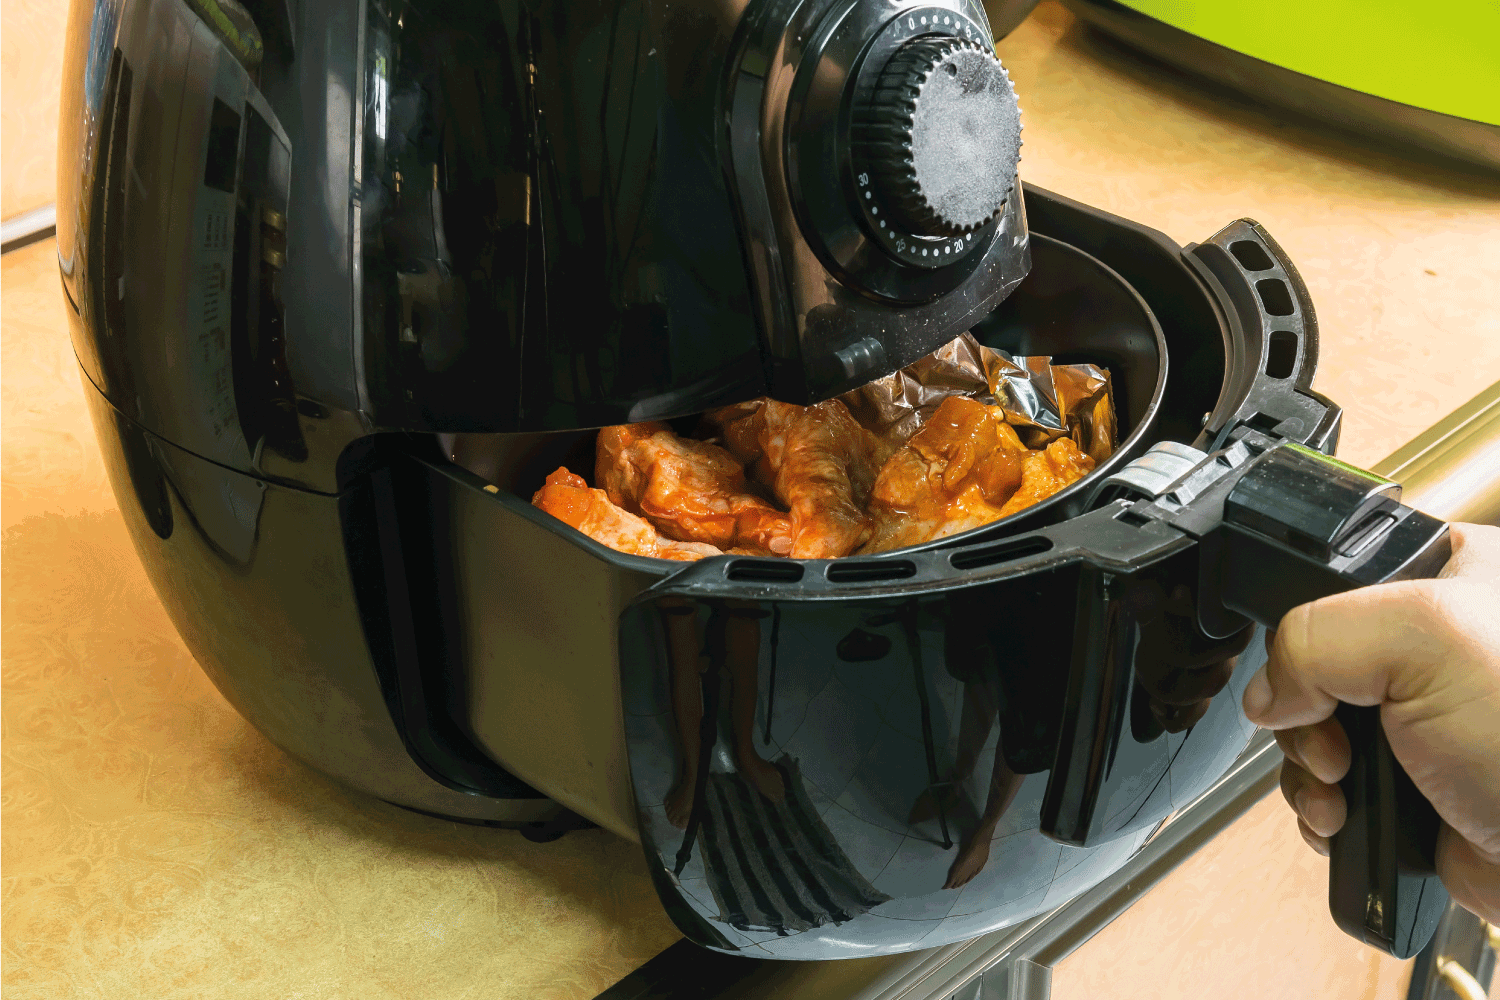 Chef's Grill BBQ Chicken Legs in oven air fryer.healthy cooking without oil. Can An Air Fryer Basket Go In The Dishwasher